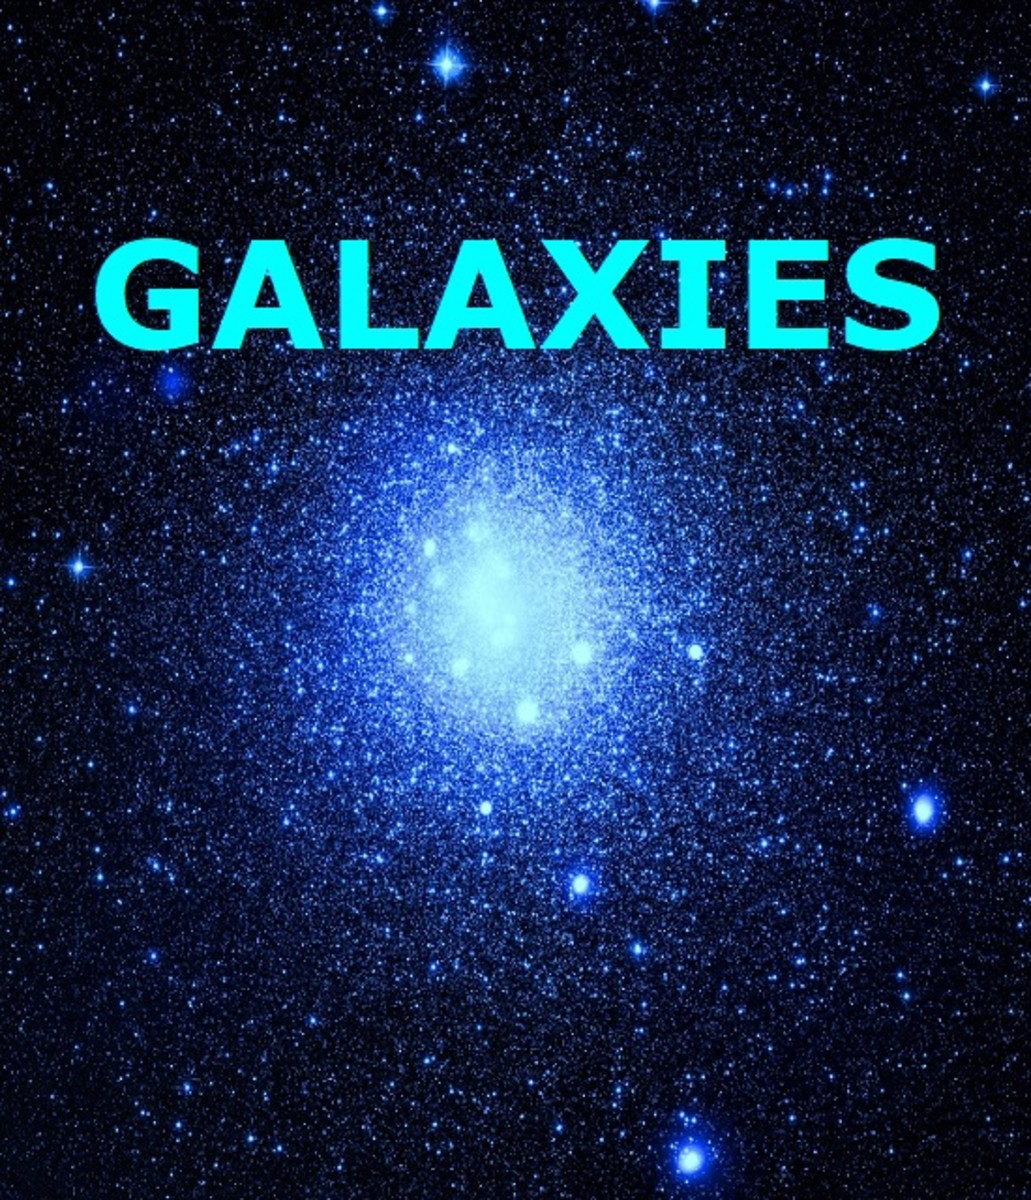 What are Galaxies?